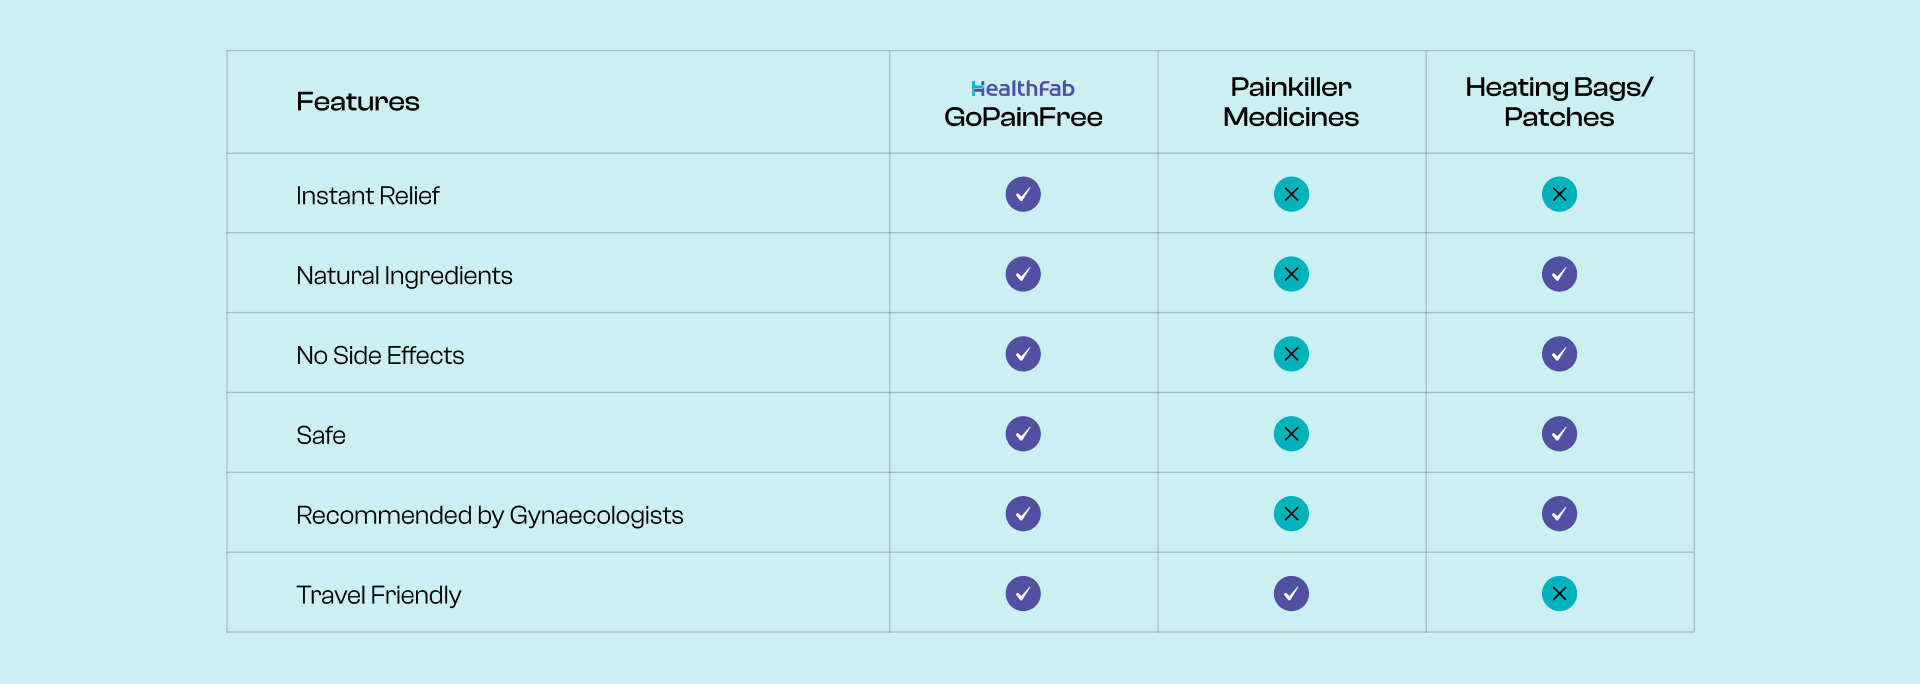 comparison between healthfab gopainfree, pain killer medicine and heating bags or heating patches